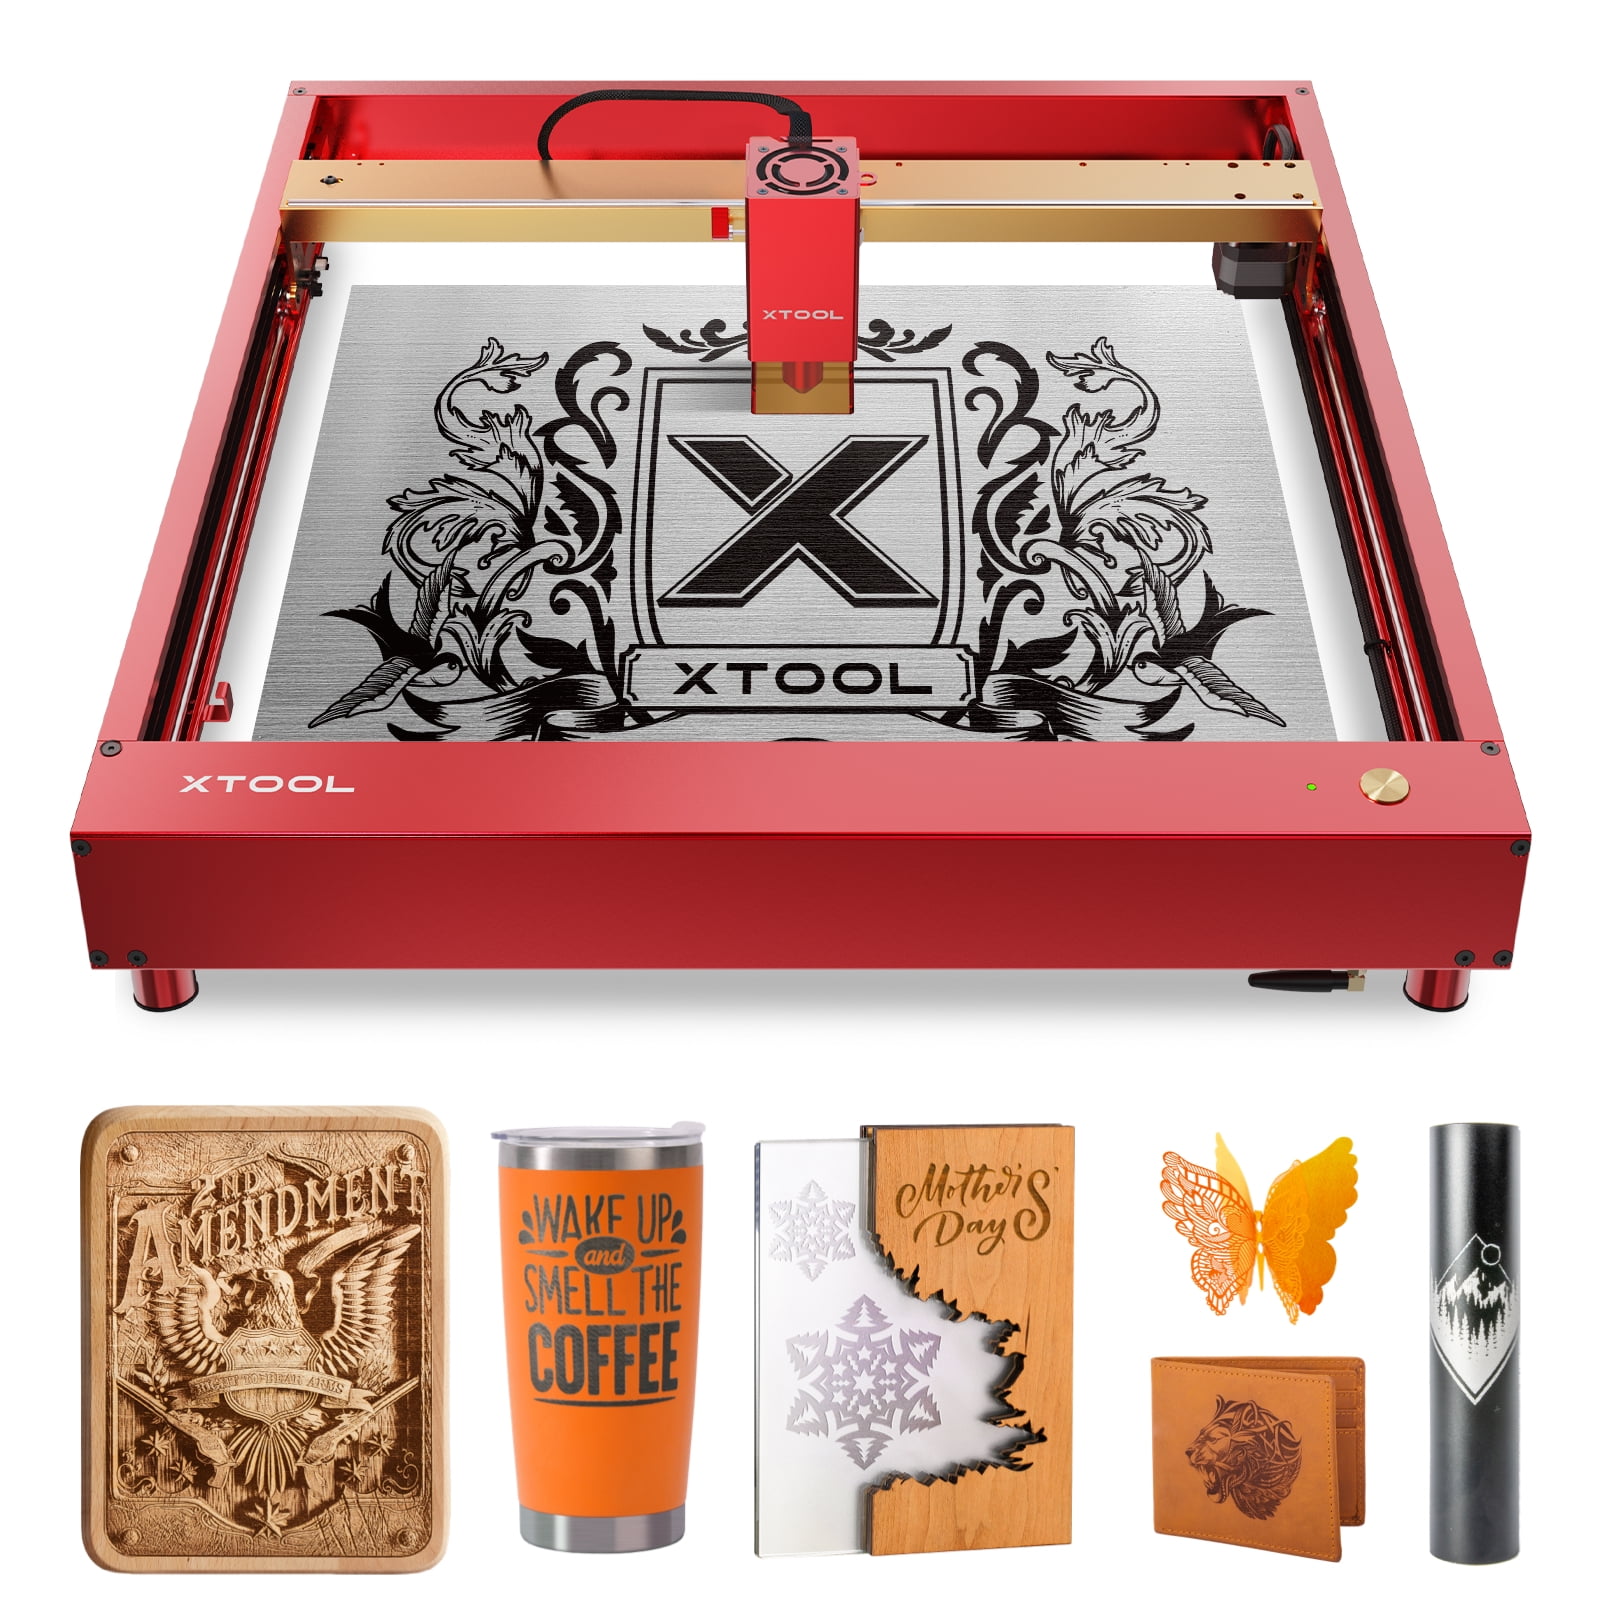 xTool S1 Laser Engravers Offers Unparalleled Safety and